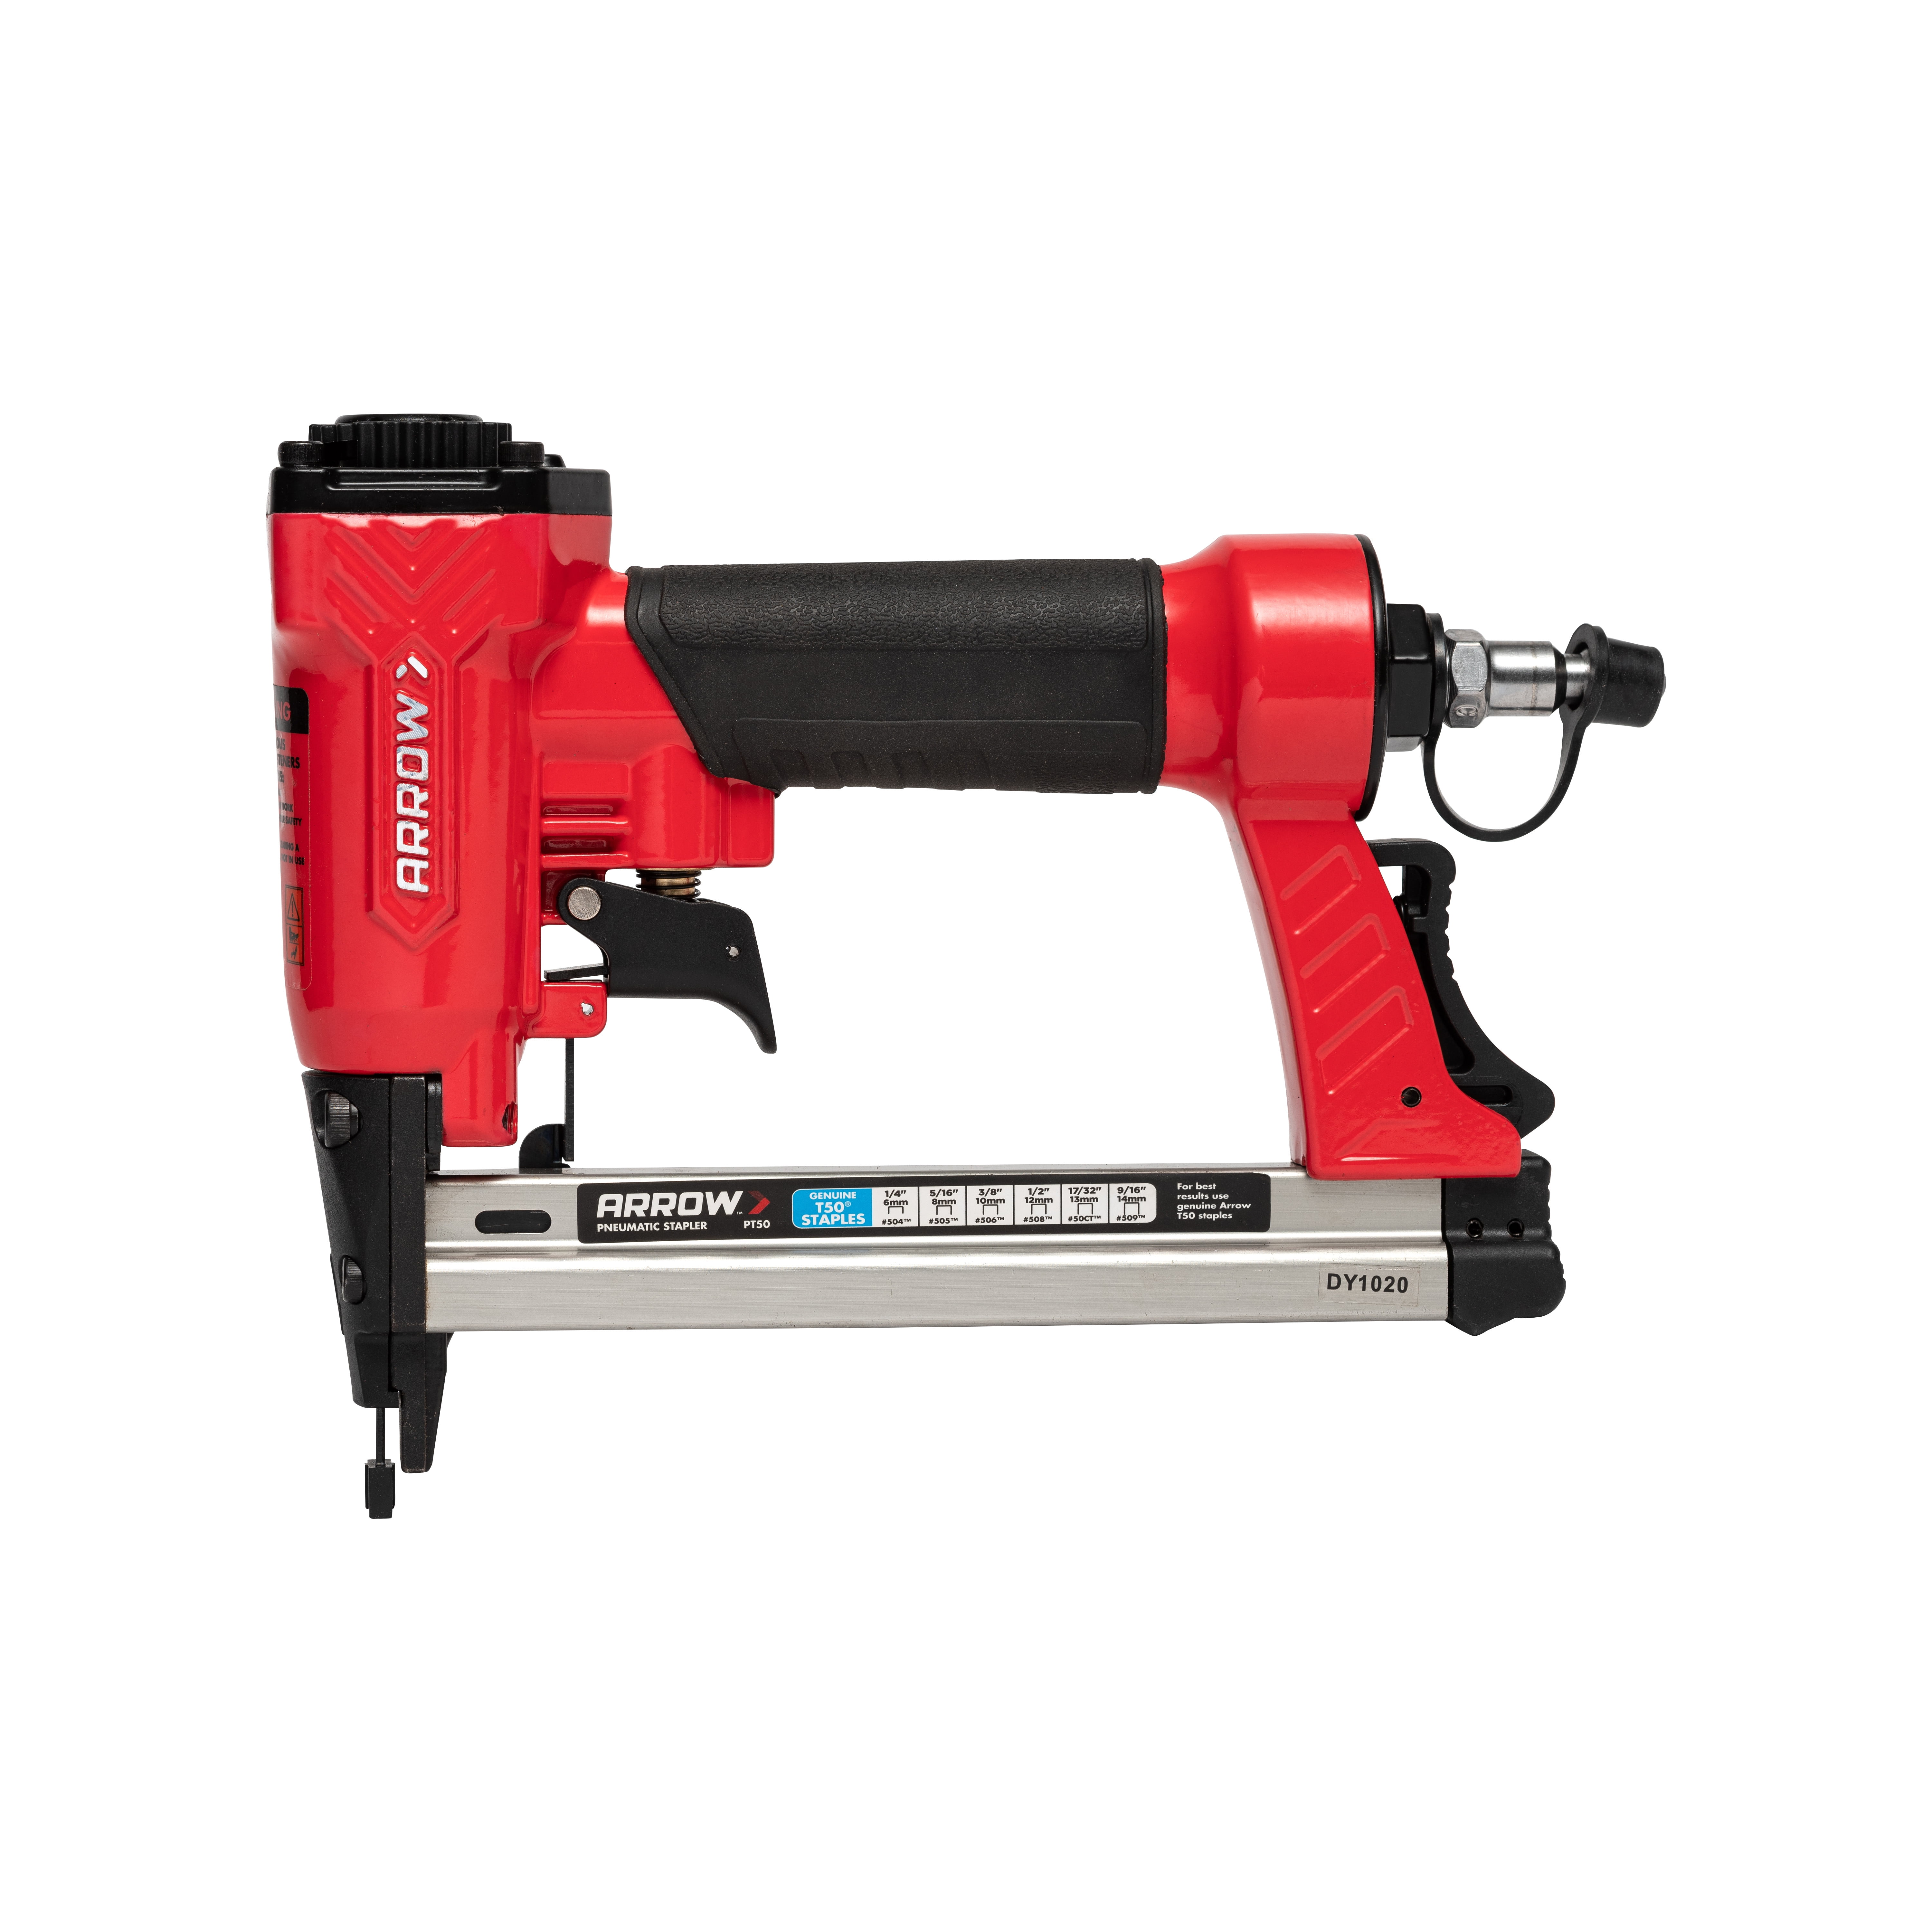 Details about   Bostitch SB 2 in 1 18 Gauge Brad Nailer USED Stapler Combo 